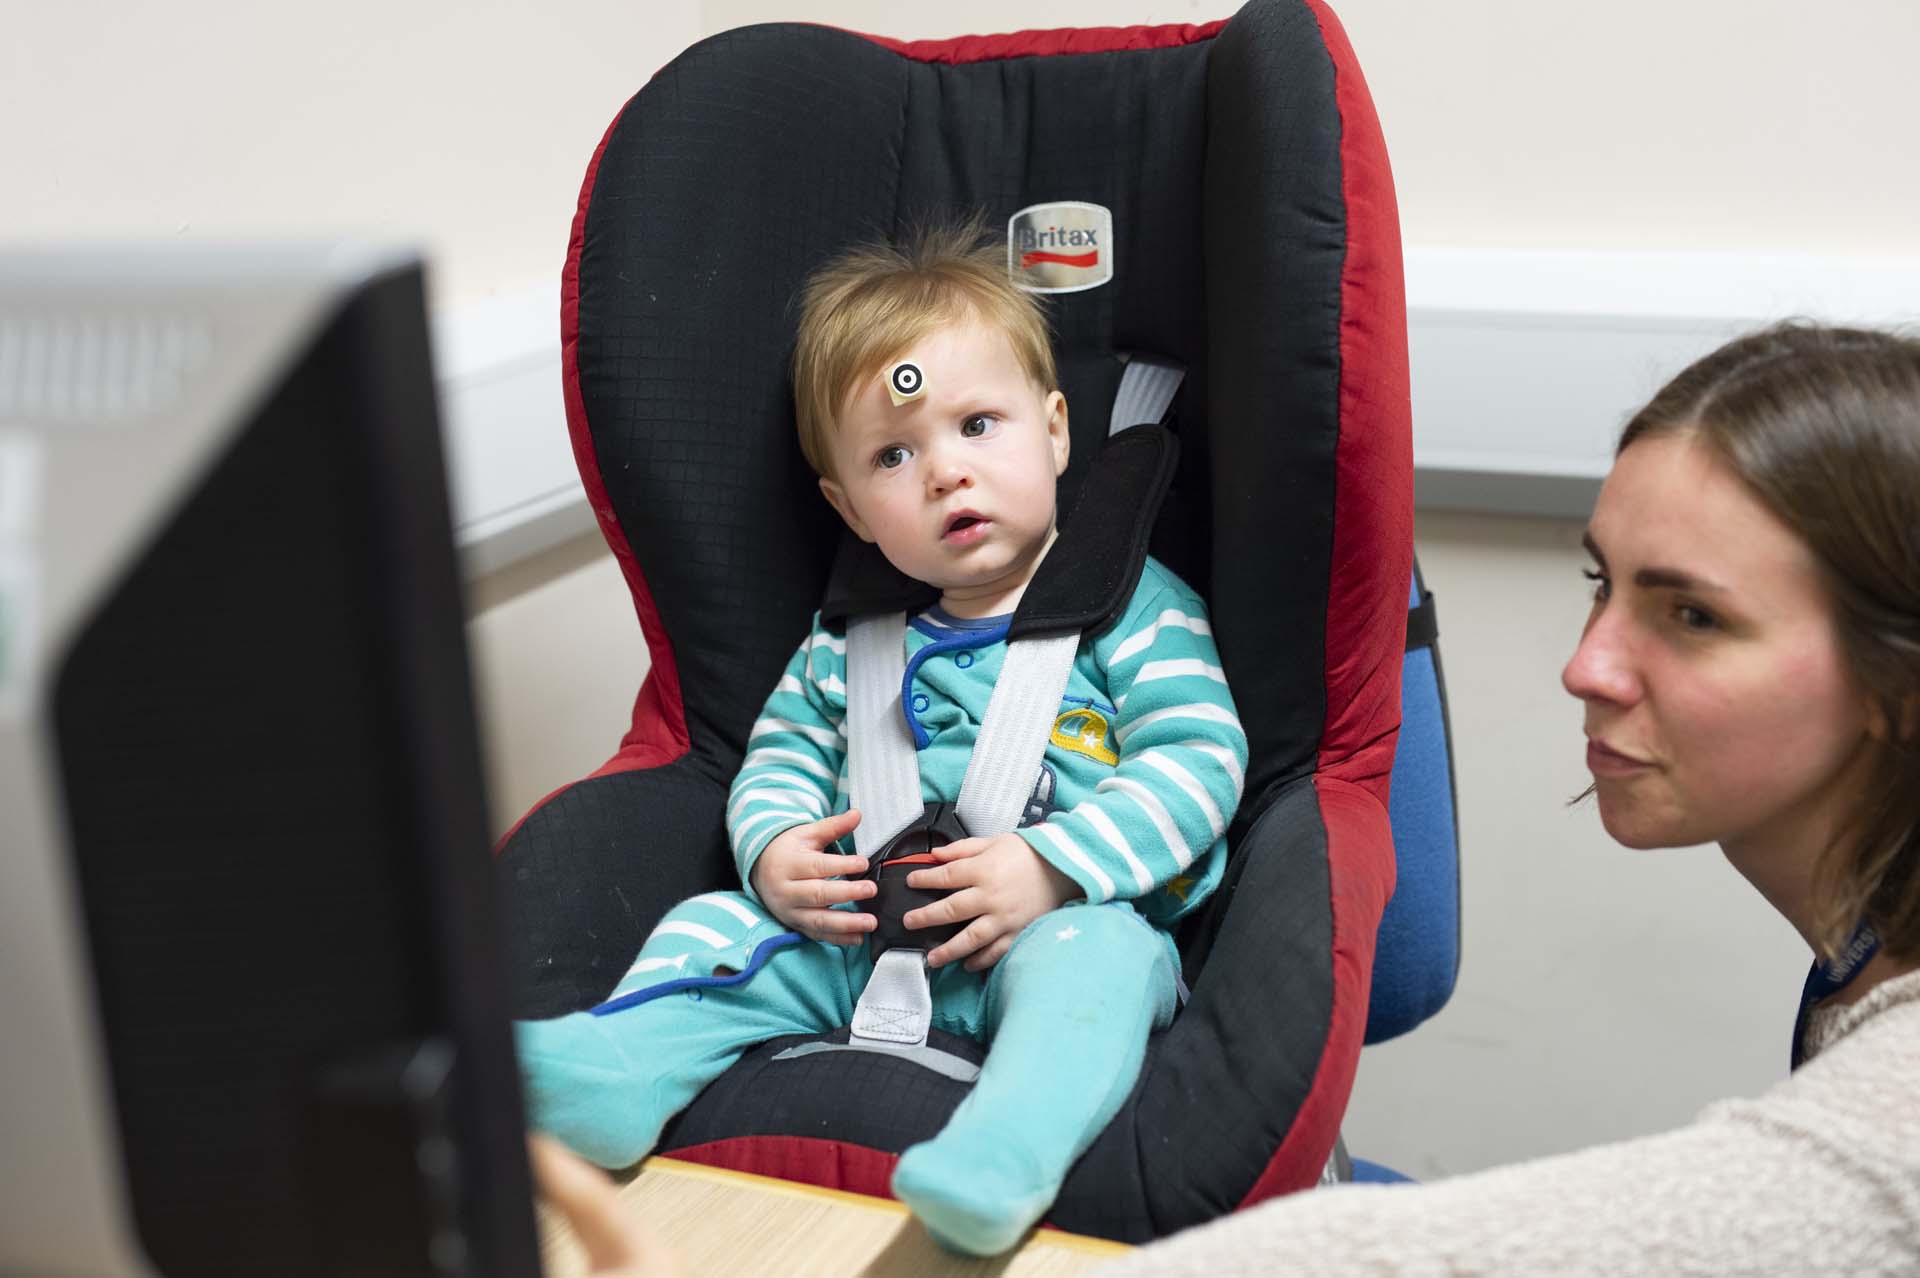 Small child taking part in research using eye-tracking equipment